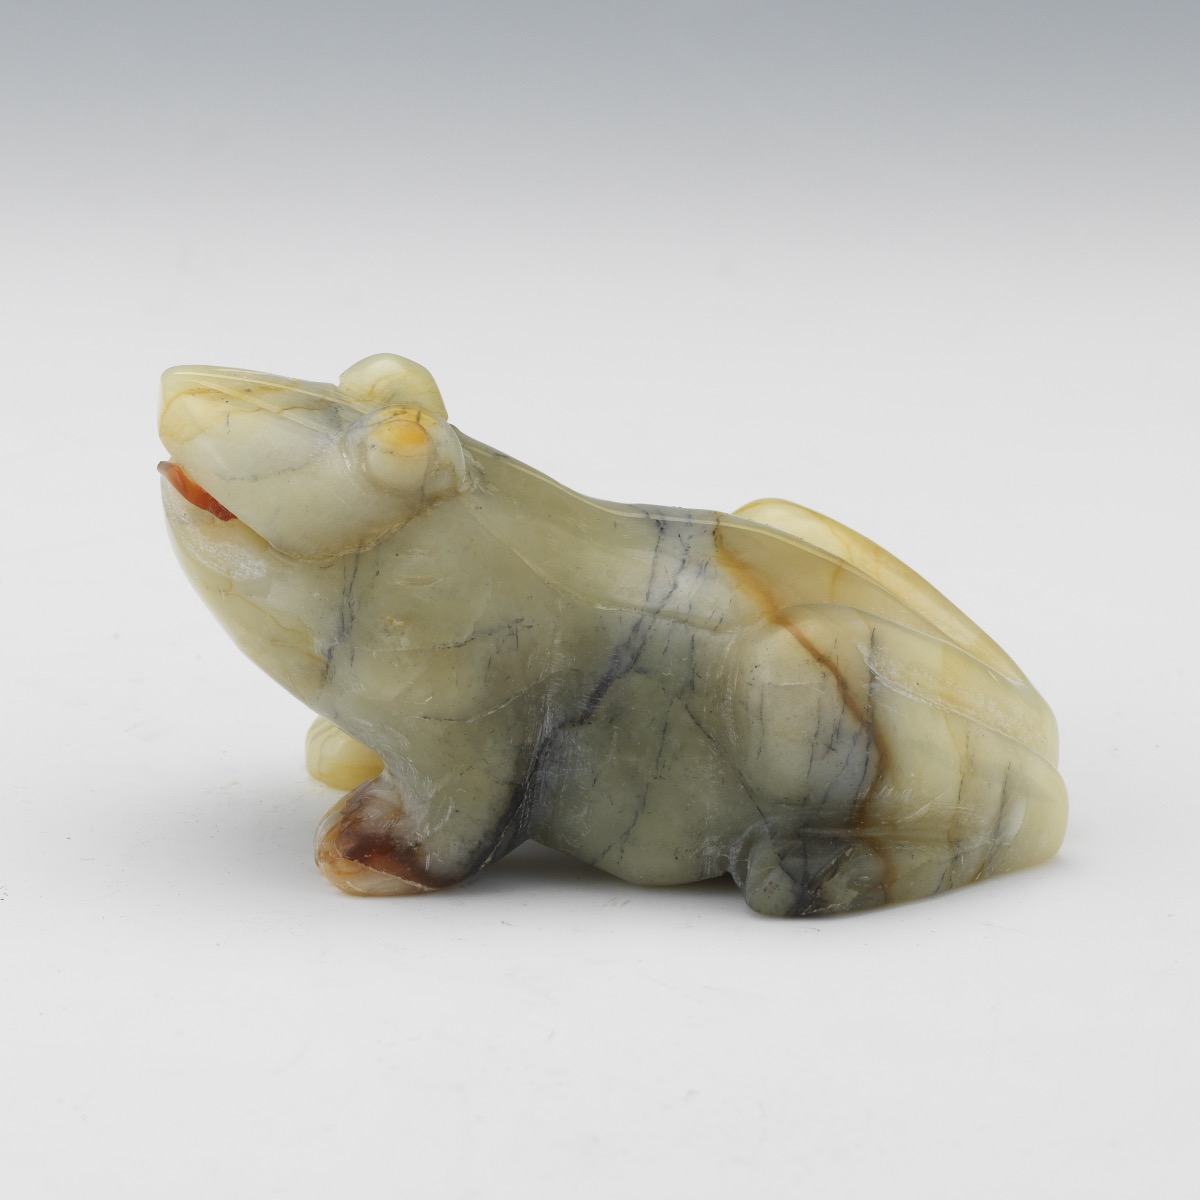 Chinese Carved Agate and Carnelian Lucky Frog Cabinet Sculpture, in Presentation Box - Image 4 of 8